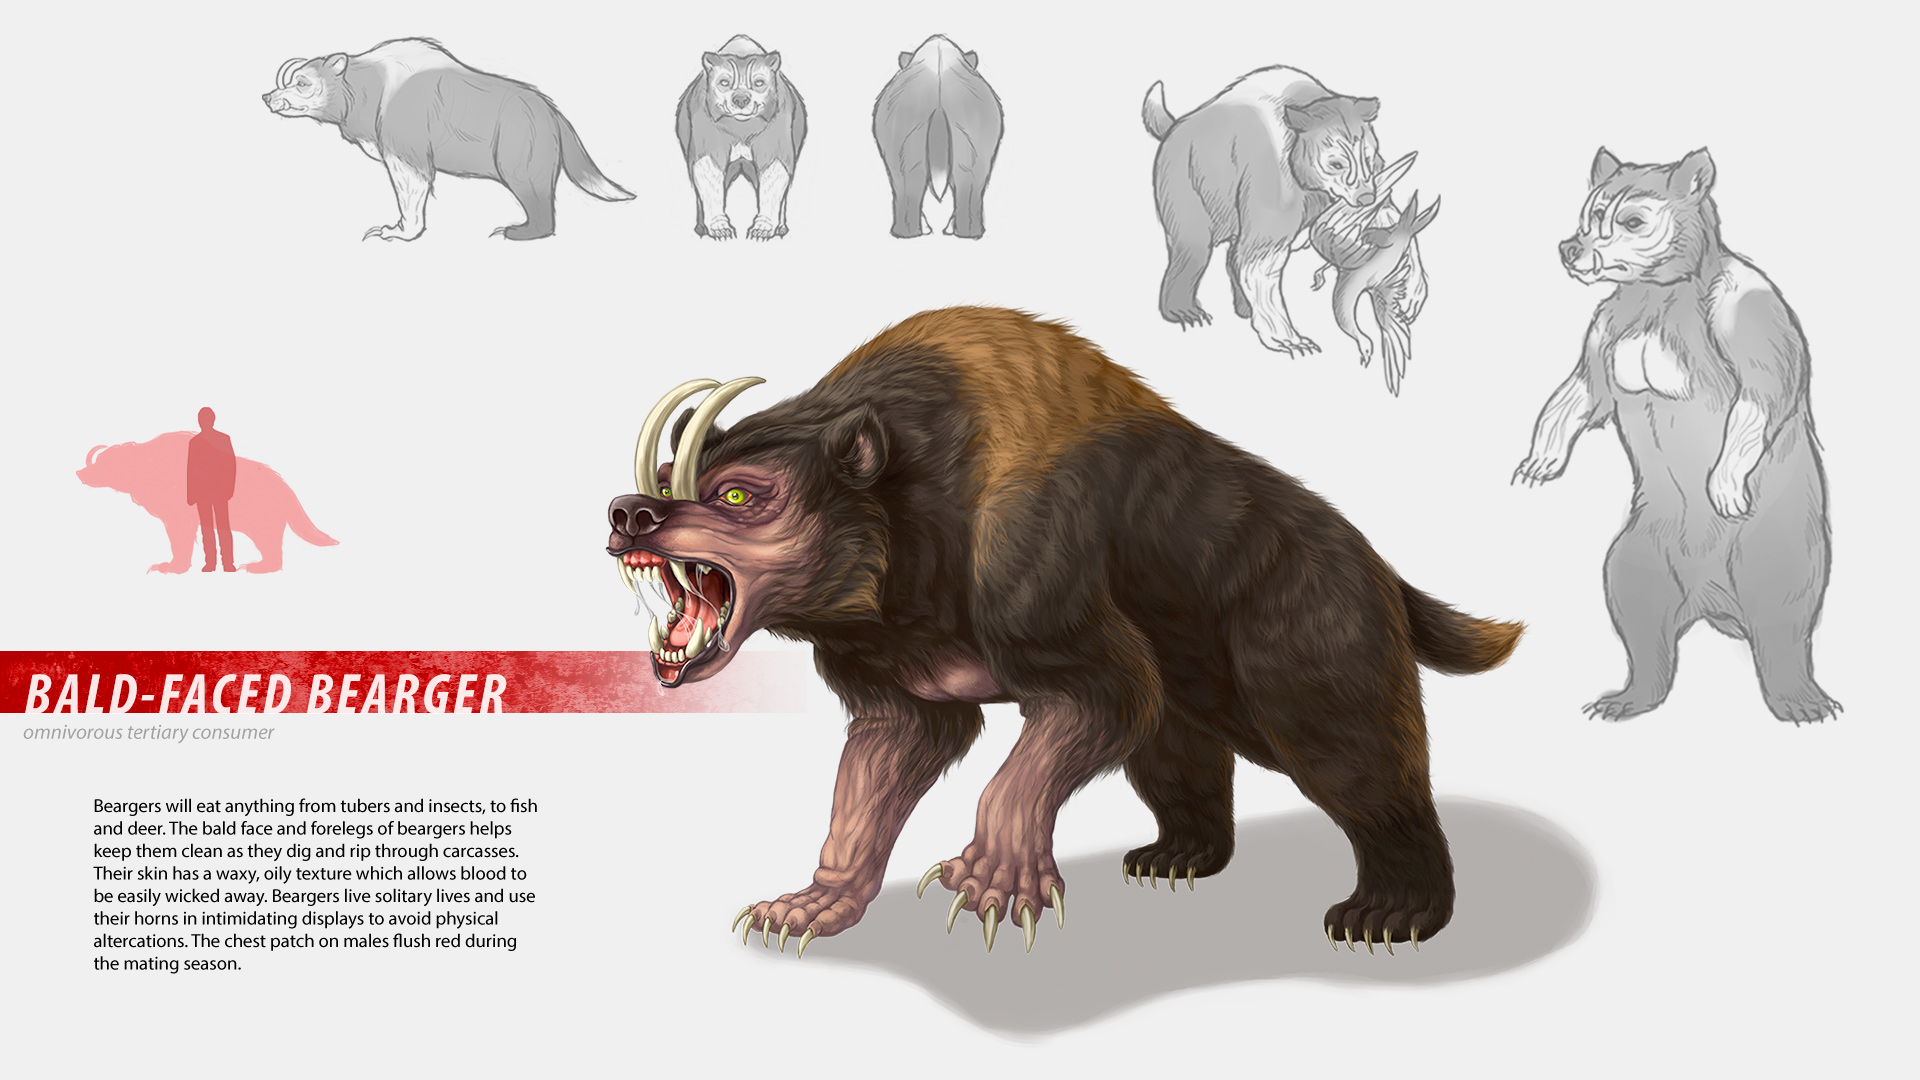 Crystal Woo | Illustration | Apex predator concept for a video game about ecology and conservation